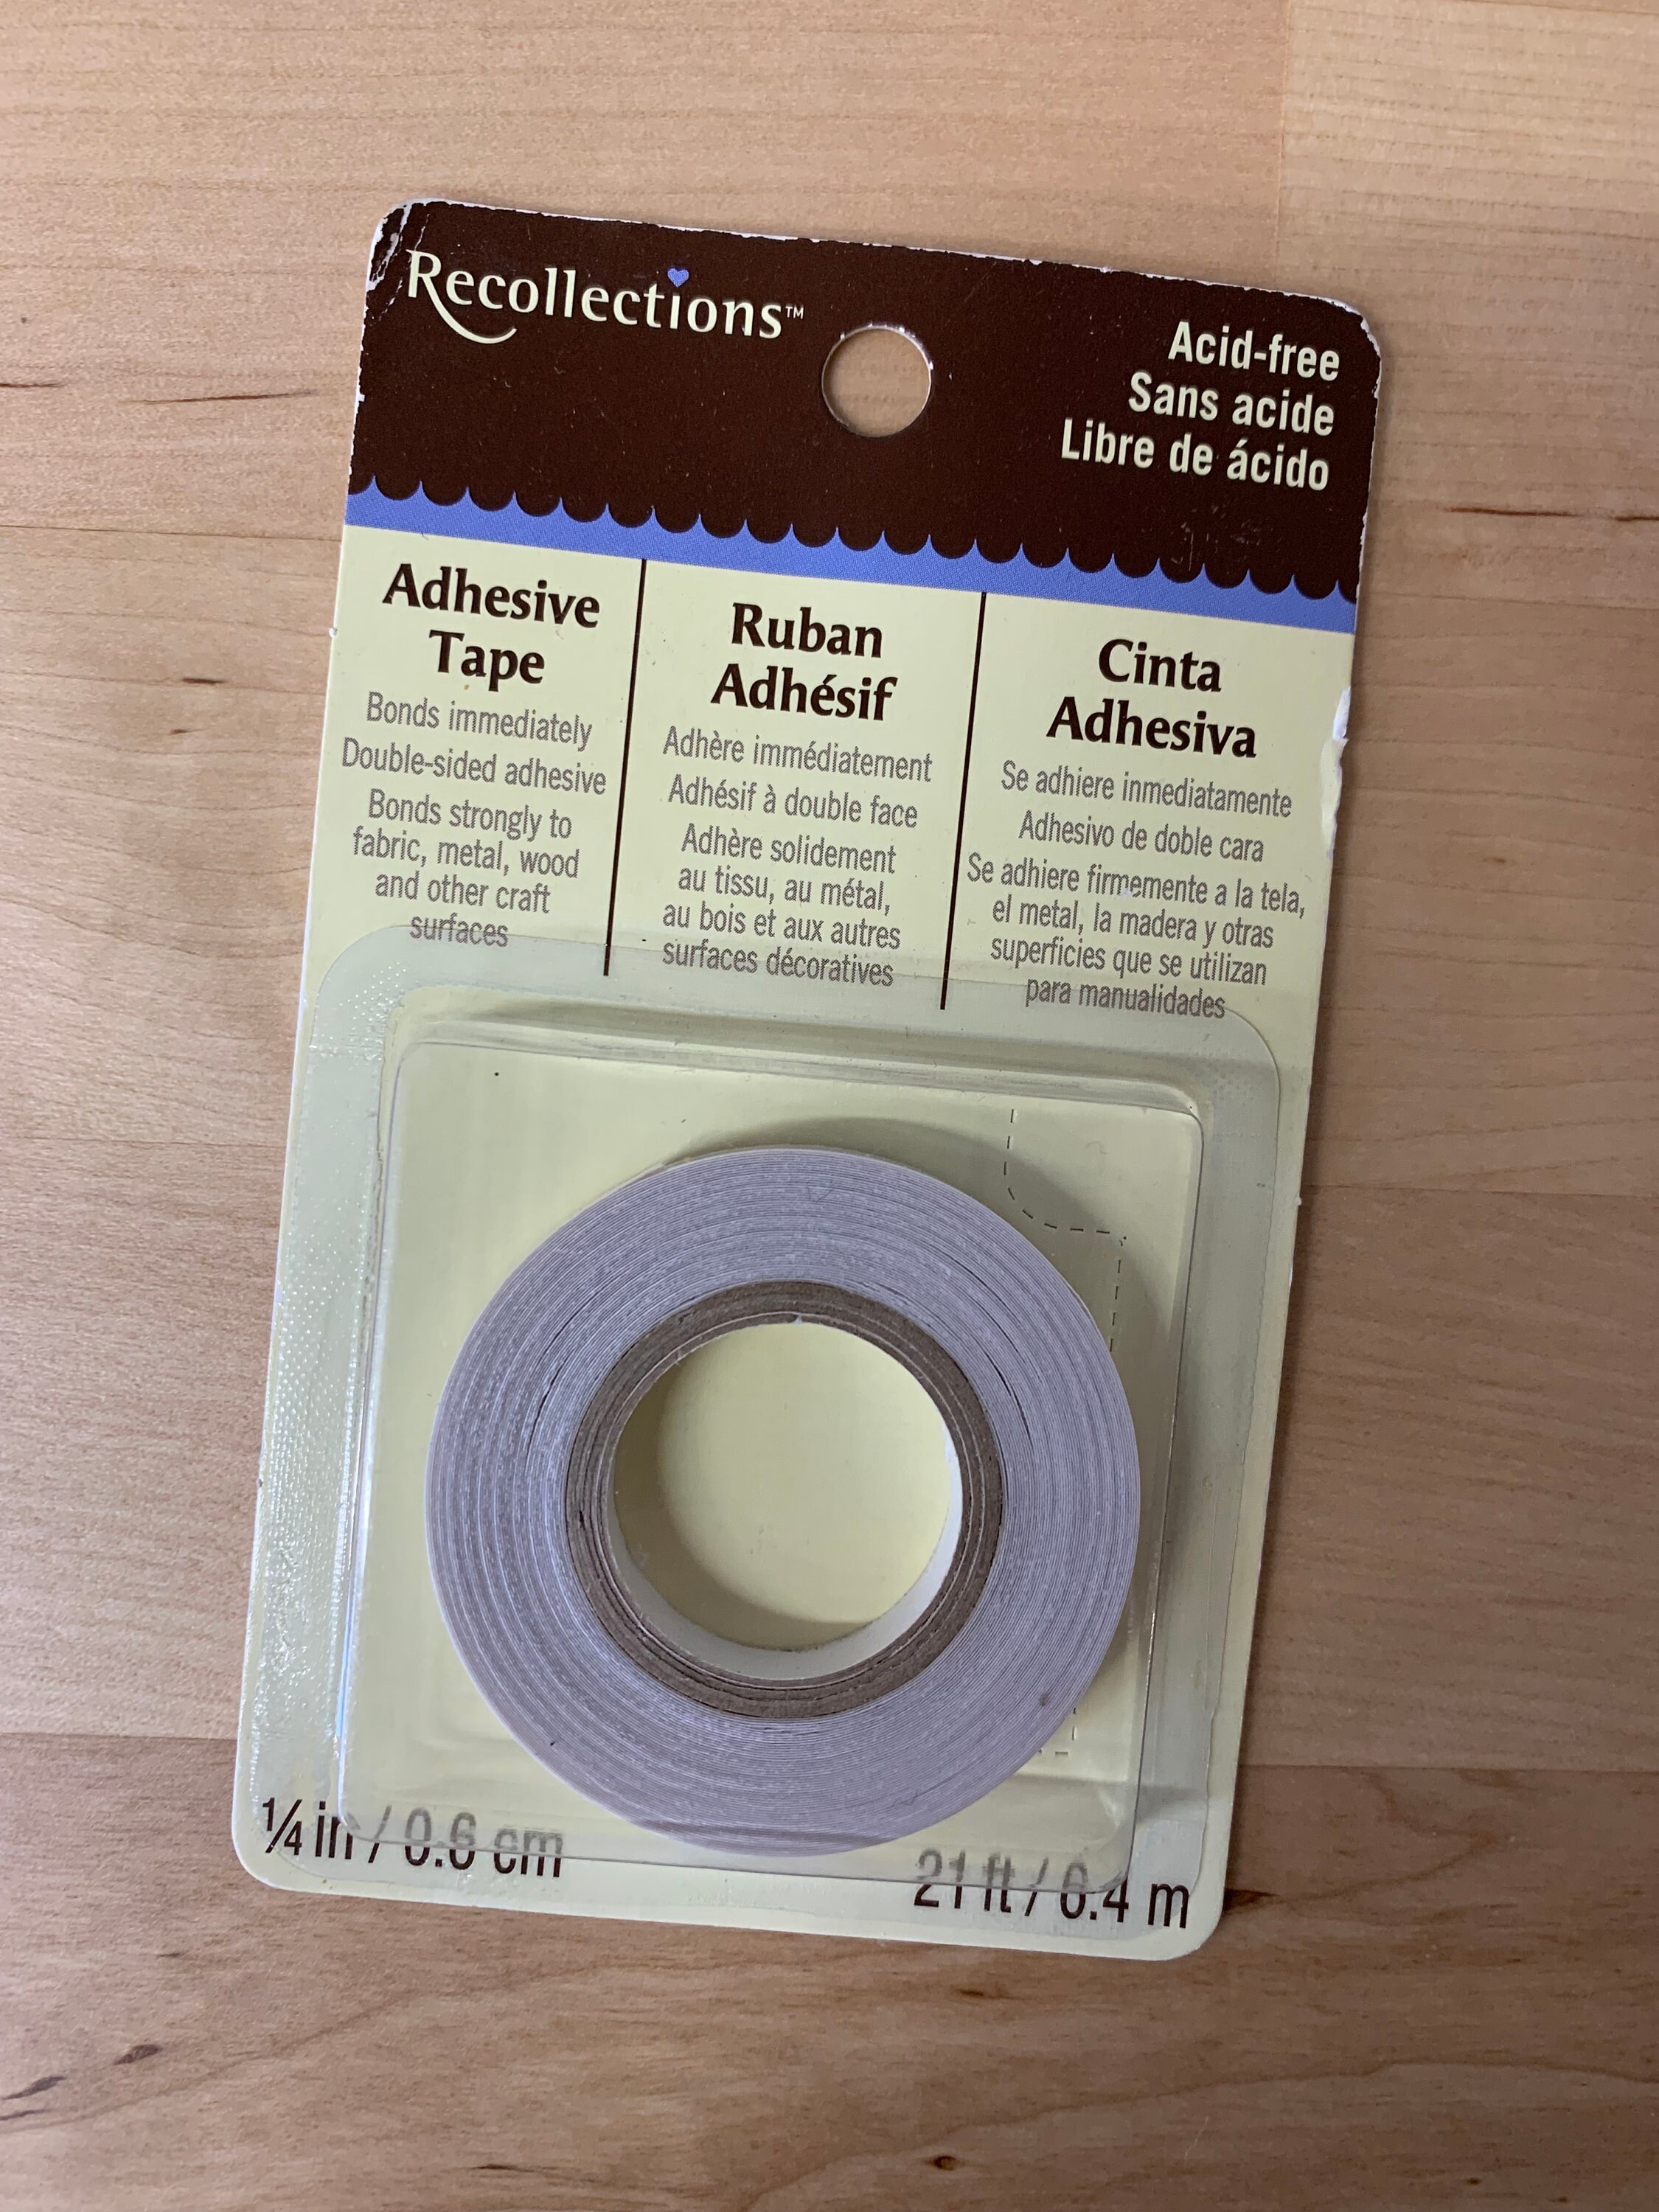 Velcro Tape. White or Black. Hook and Loop Tape. 1mtr X 20mm. Stick on  Adhesive Tape. Strong. Easy to Use. 